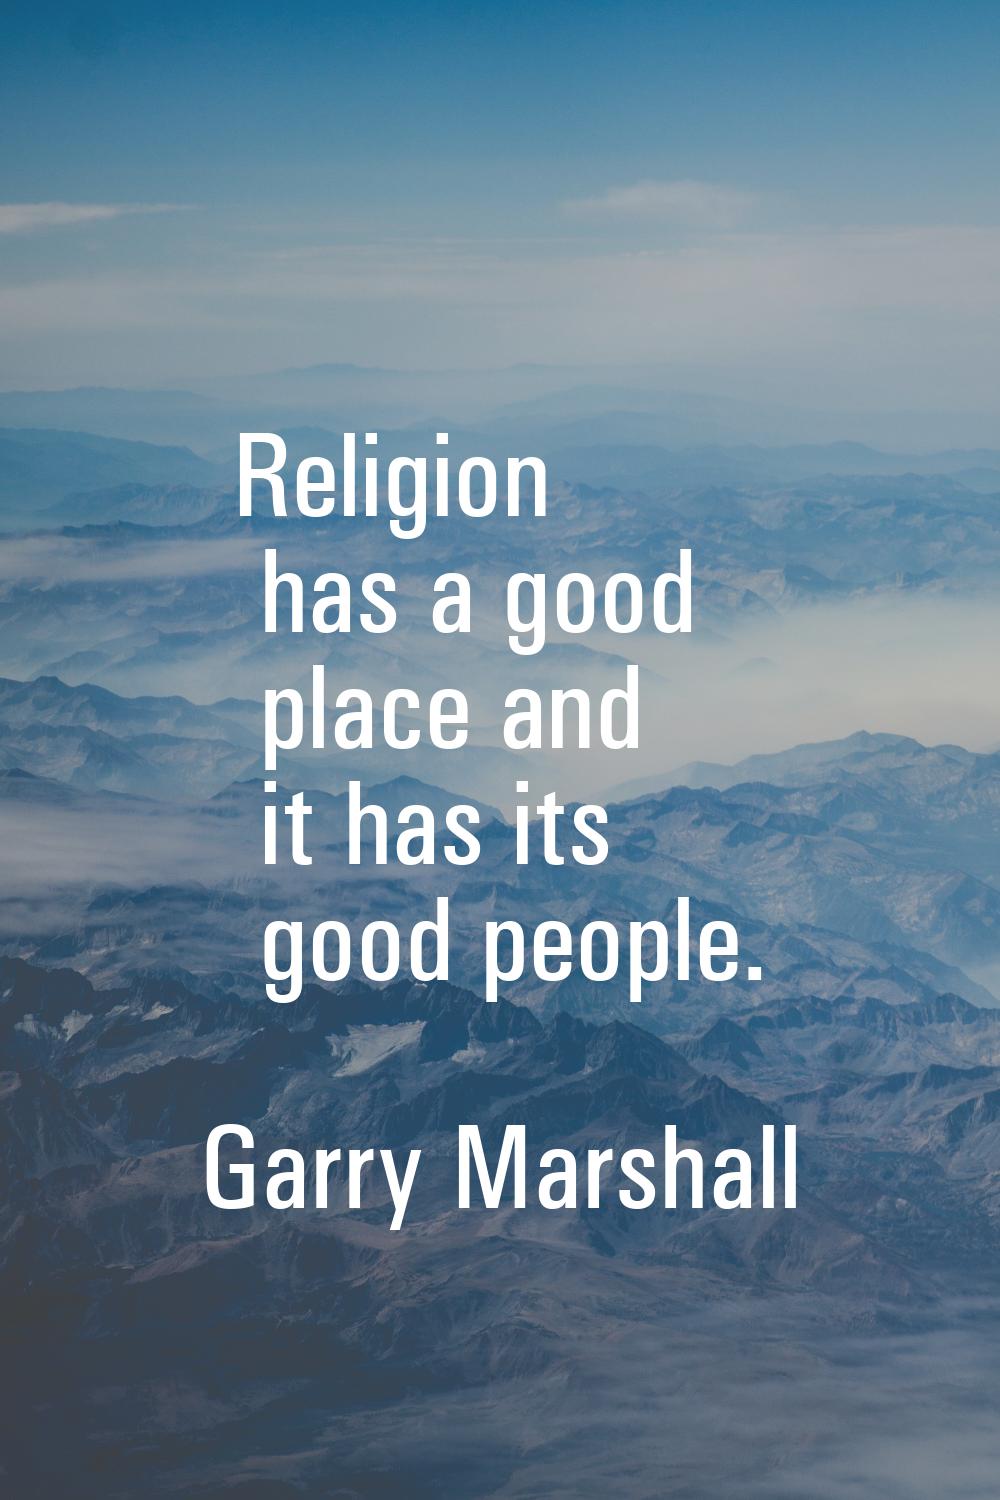 Religion has a good place and it has its good people.